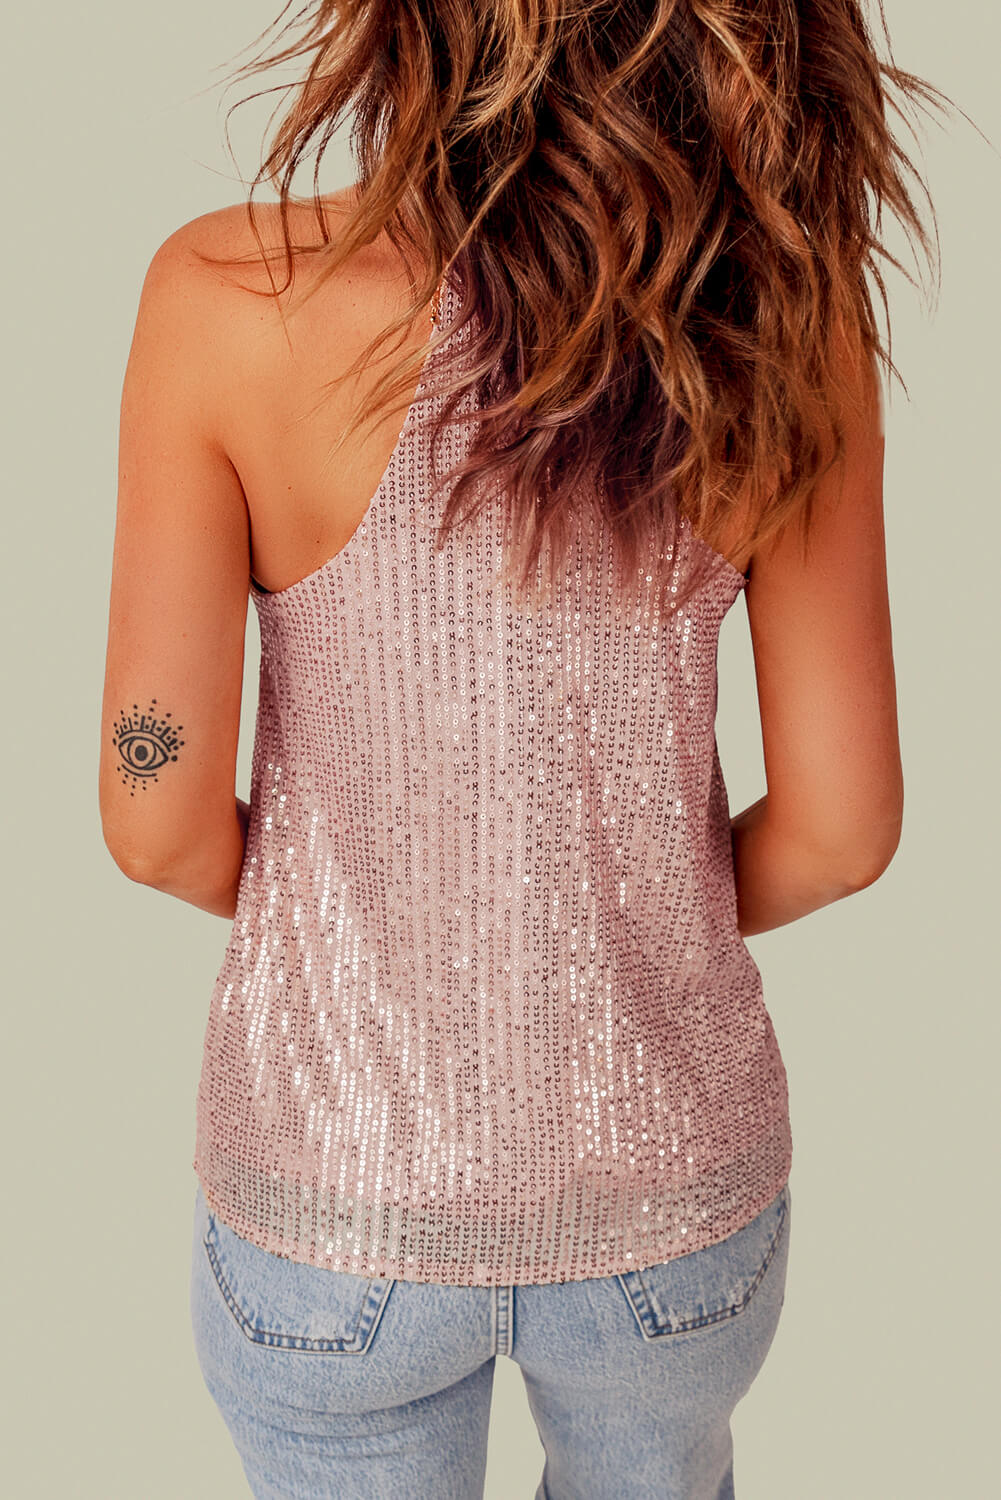 Sequin Racerback Tank Print on any thing USA/STOD clothes